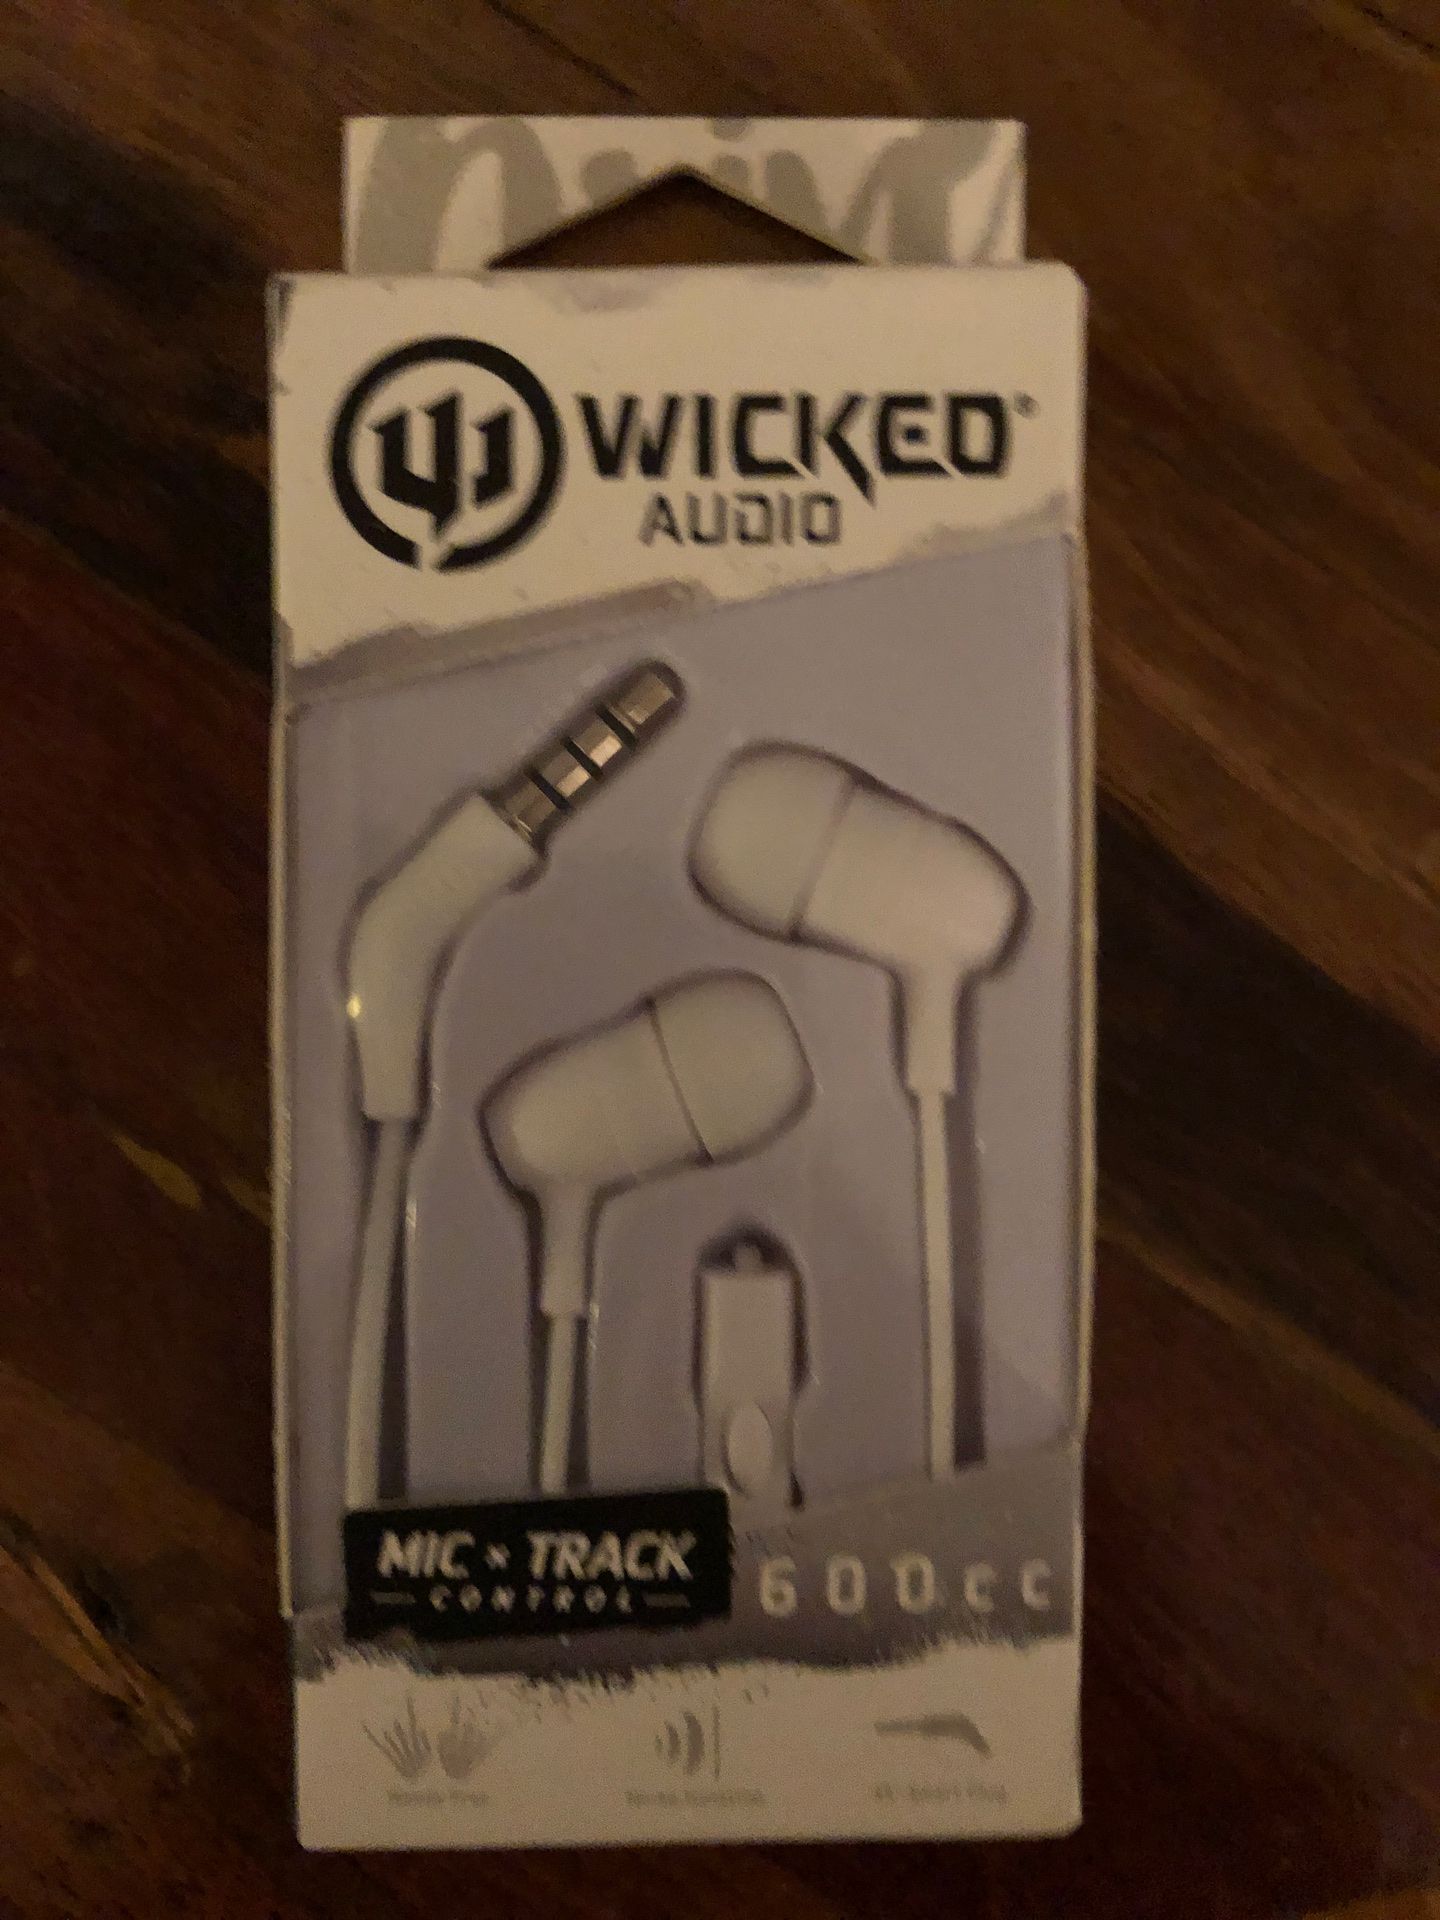 New earbuds with mic track control